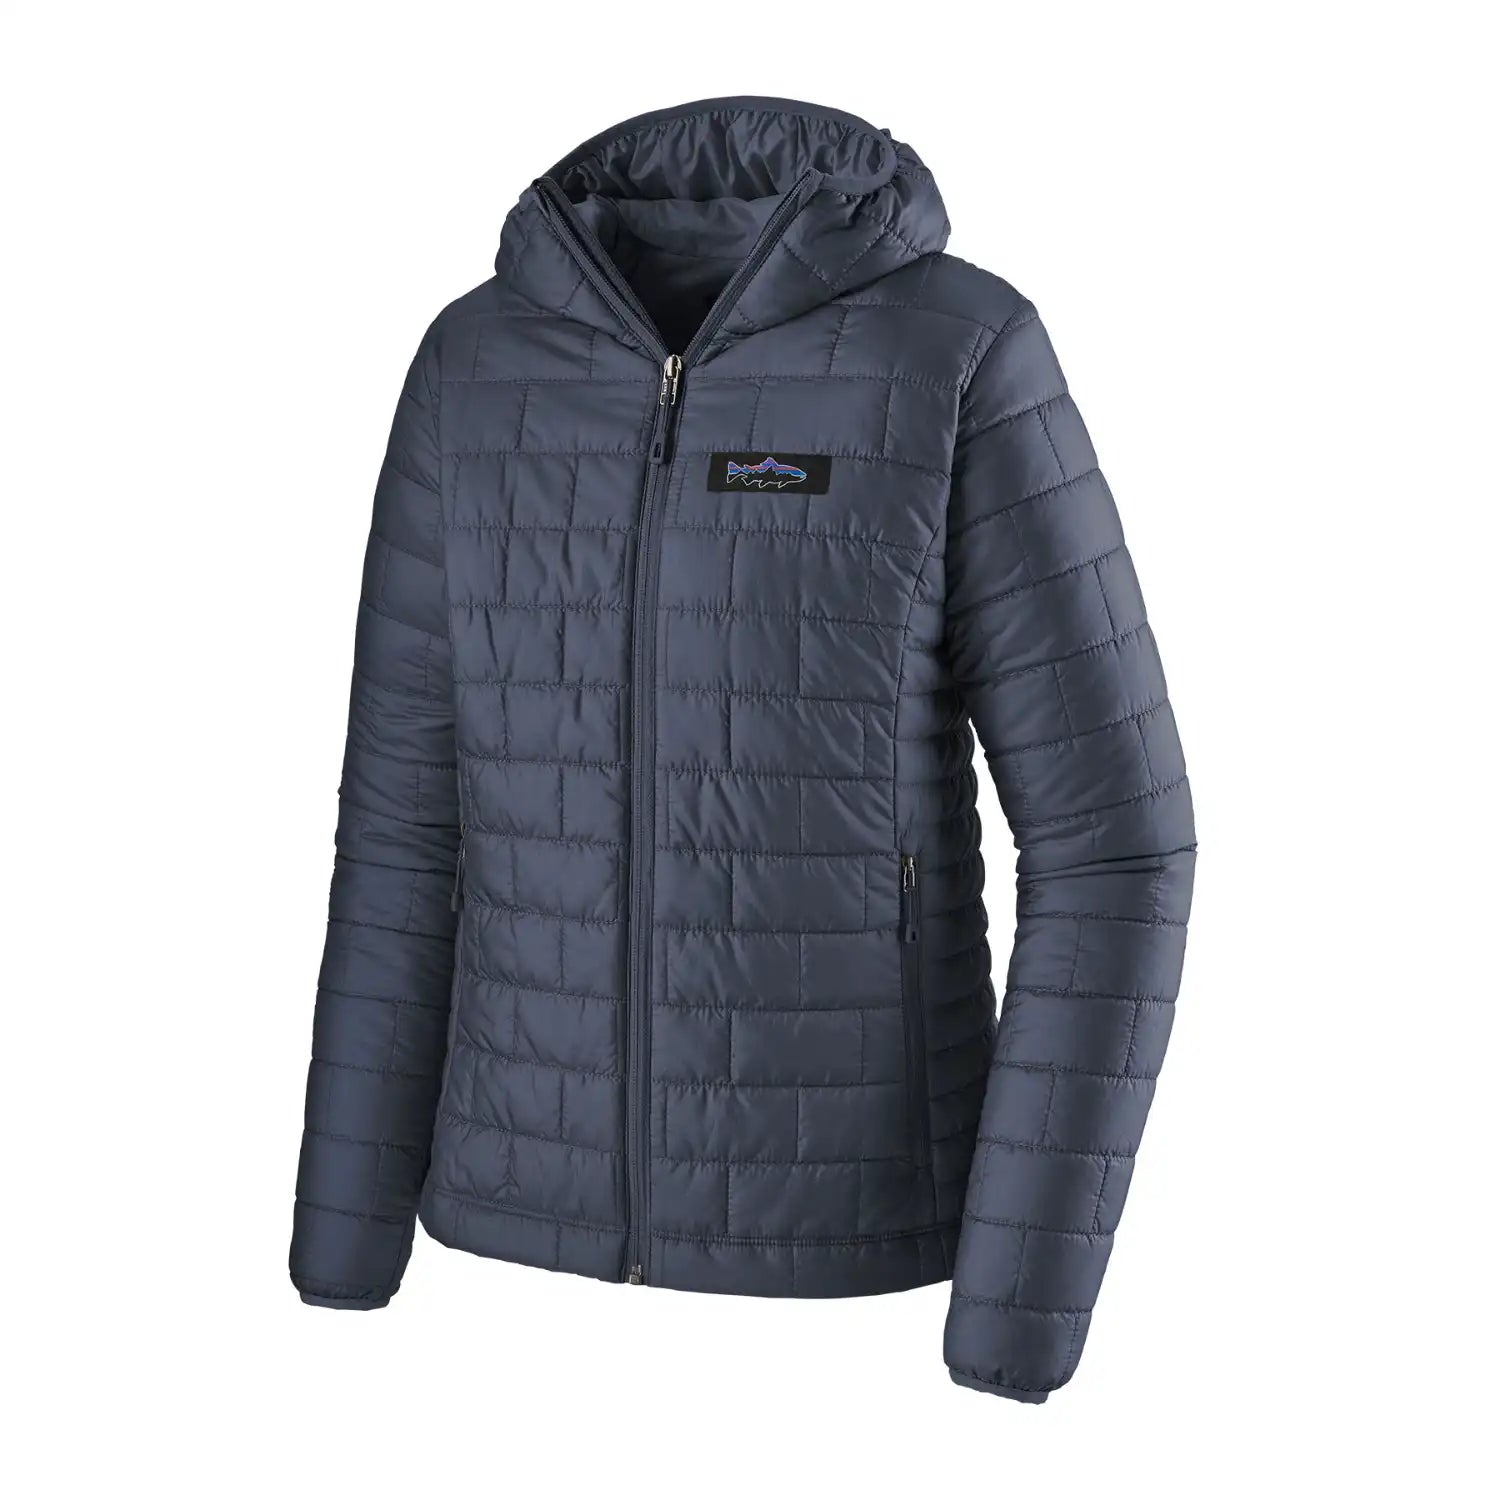 Manteau isolé Icicle - Femme||Icicle Insulated Jacket - Women's